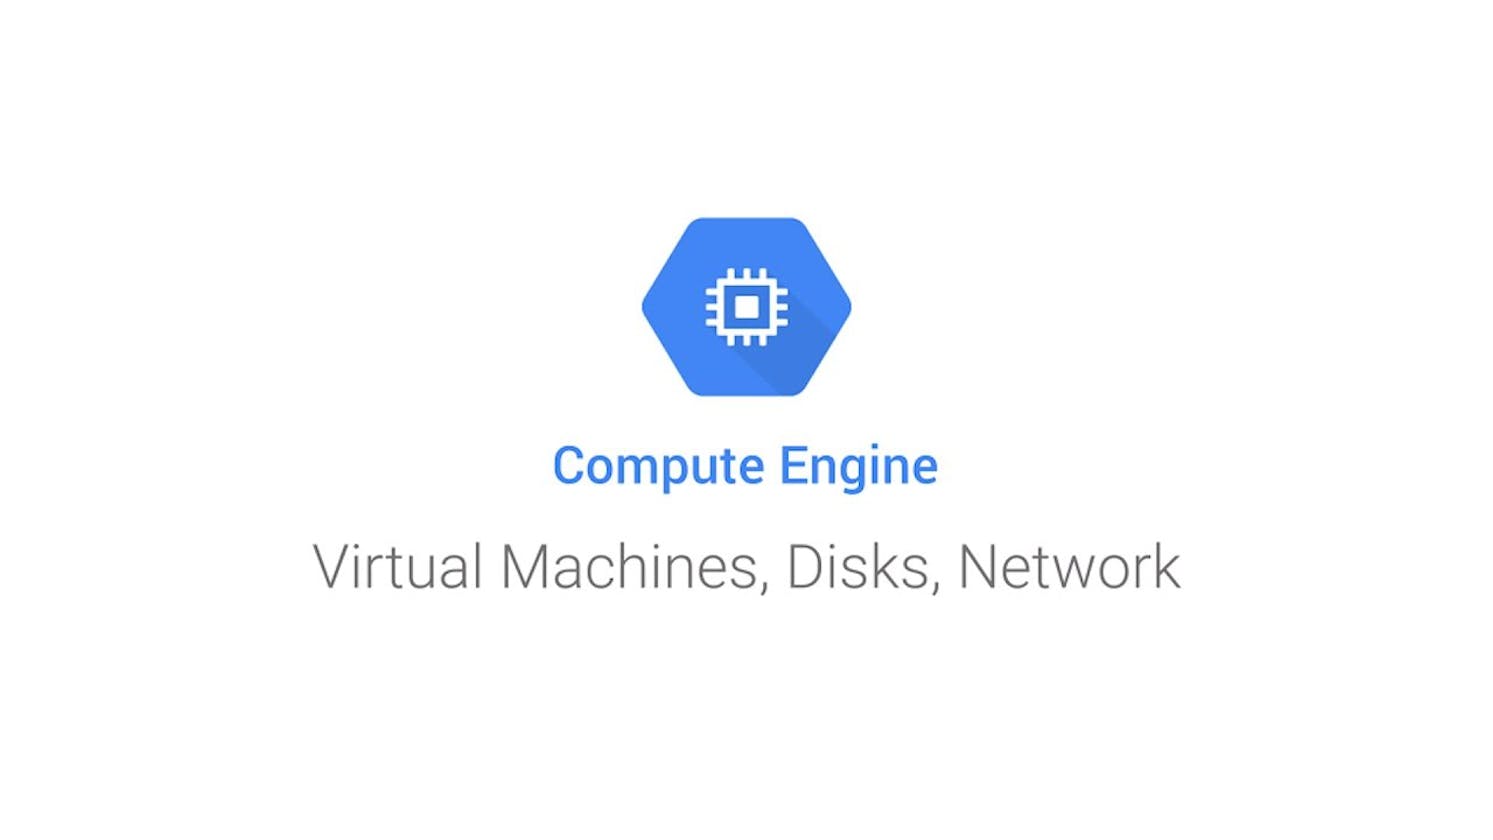 Creating a Virtual Machine in google cloud and running NGINX web server